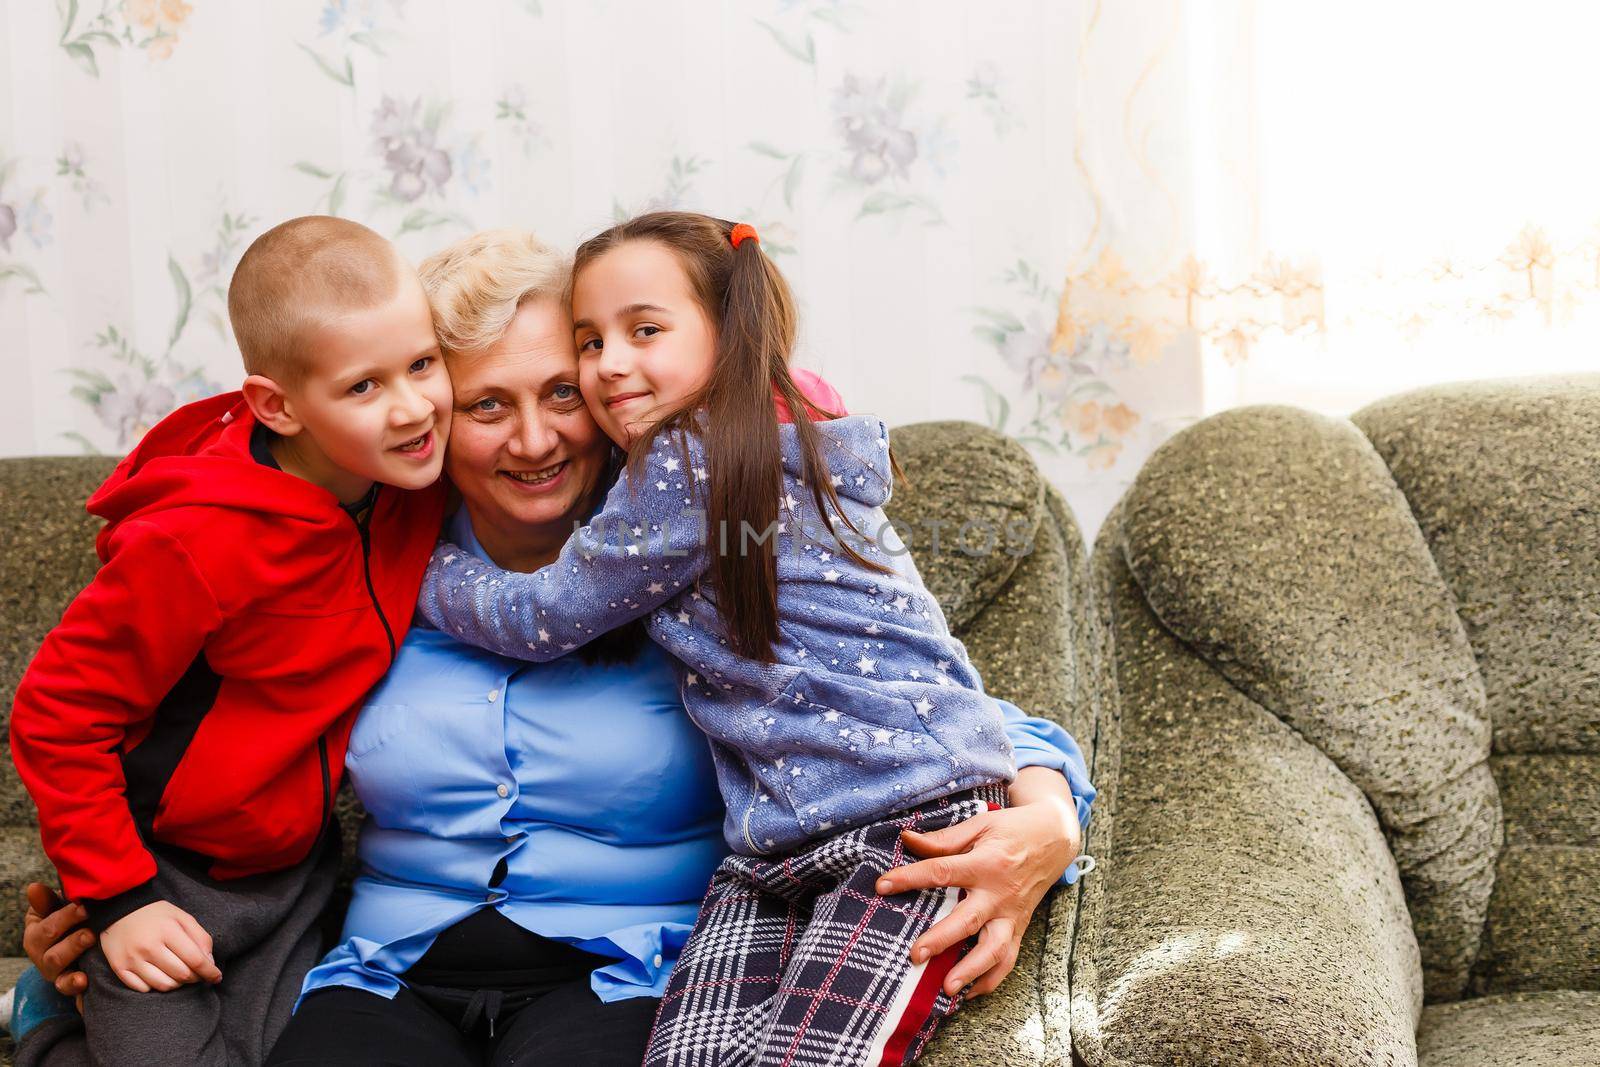 Grown up adult smiling grandchildren embraces elderly grandmother glad to see missing her, visit of loving relatives enjoy communication, cuddle as symbol of connection, love and support concept